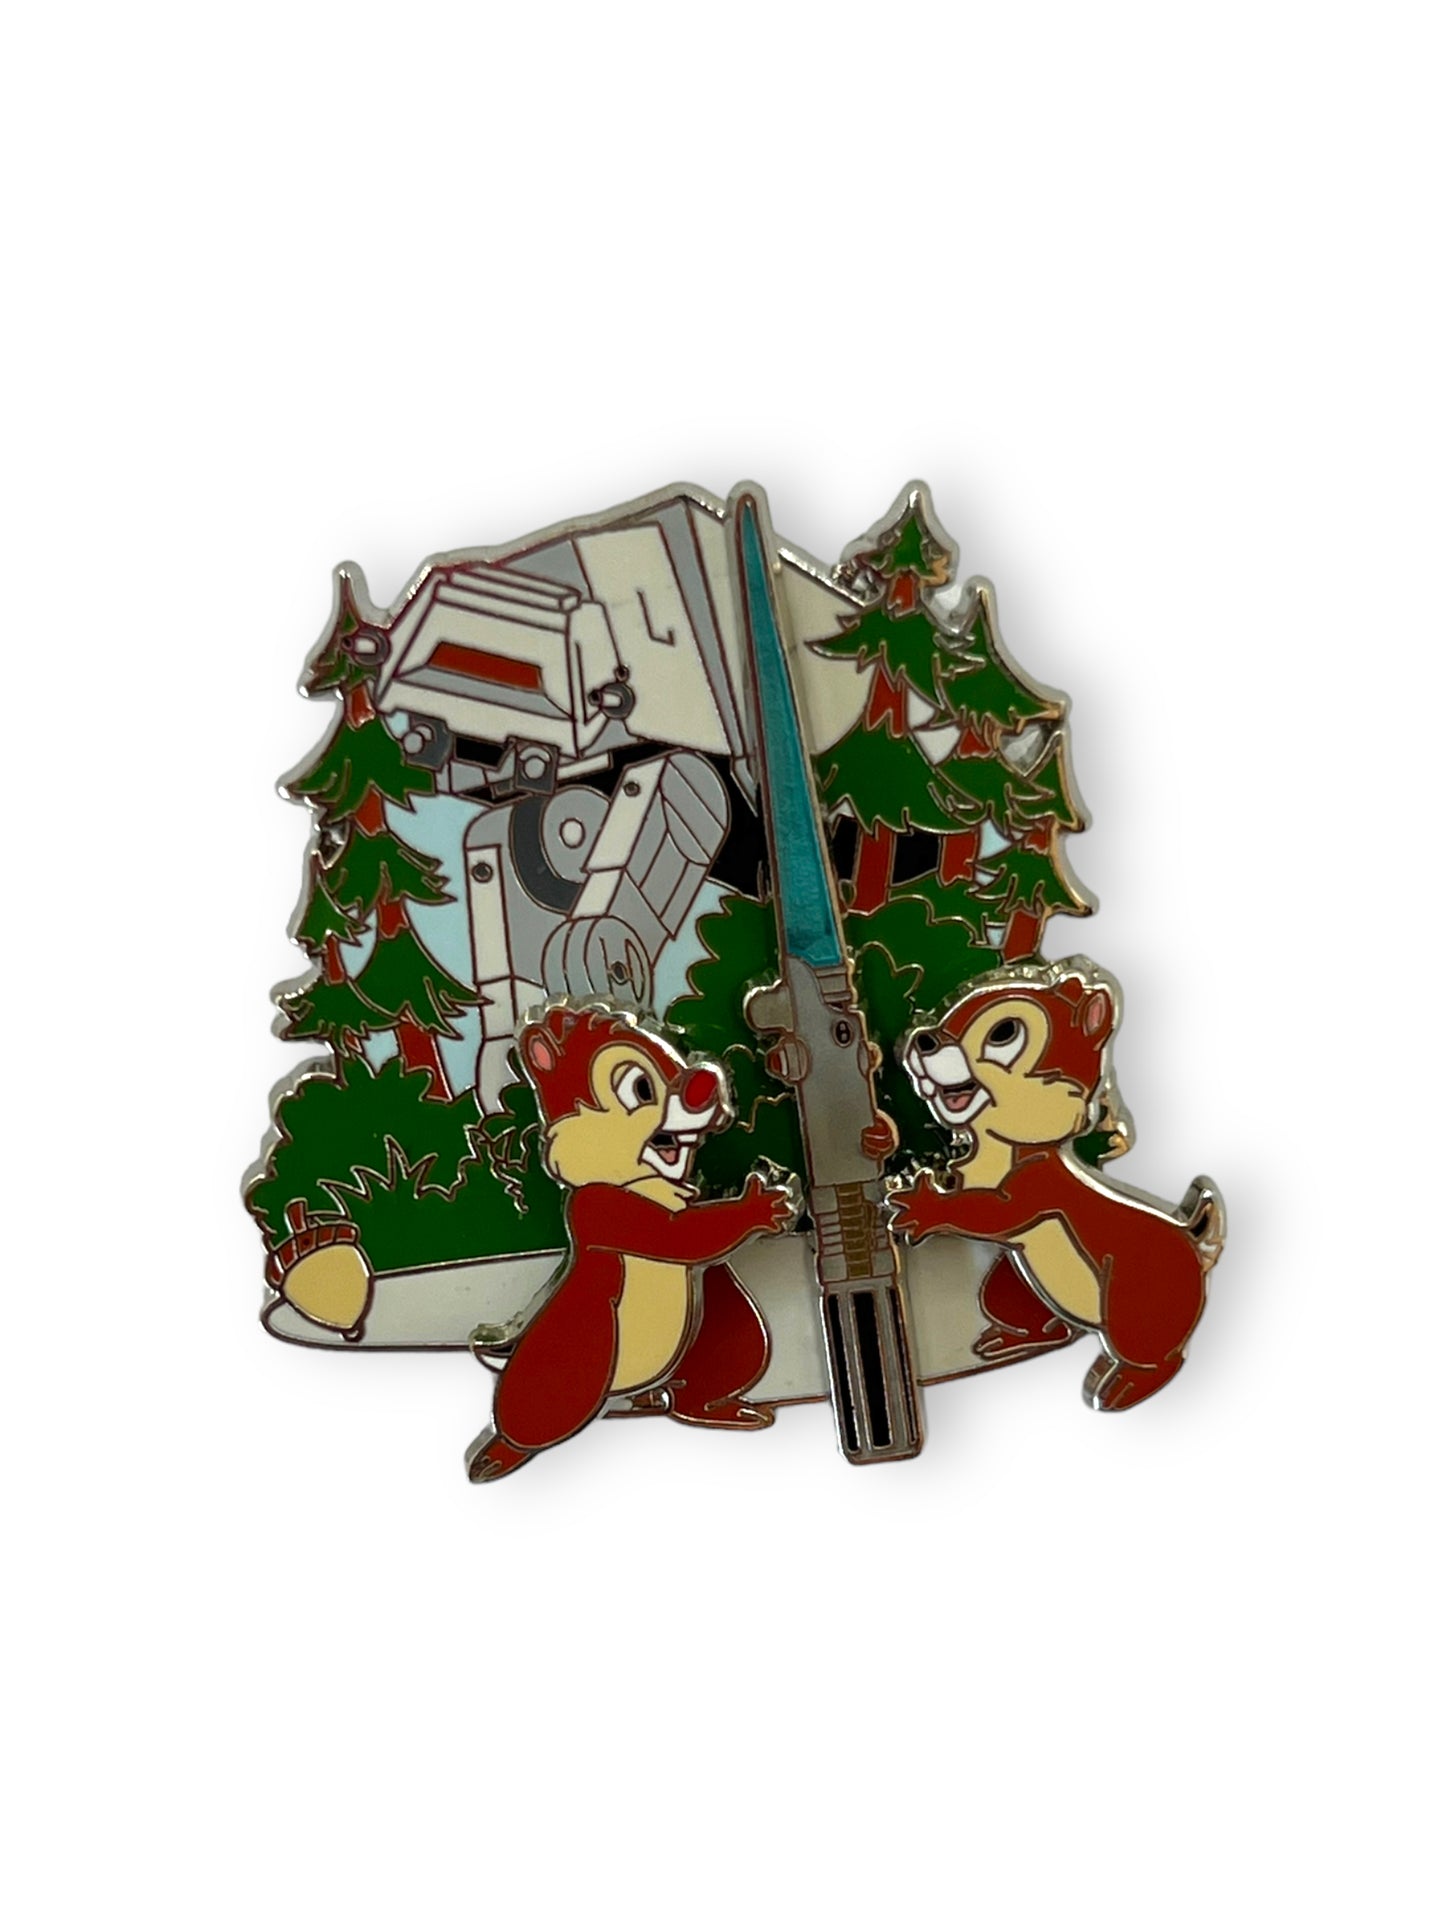 Chip n' Dale Adventure Star Tours Completer Box Pin